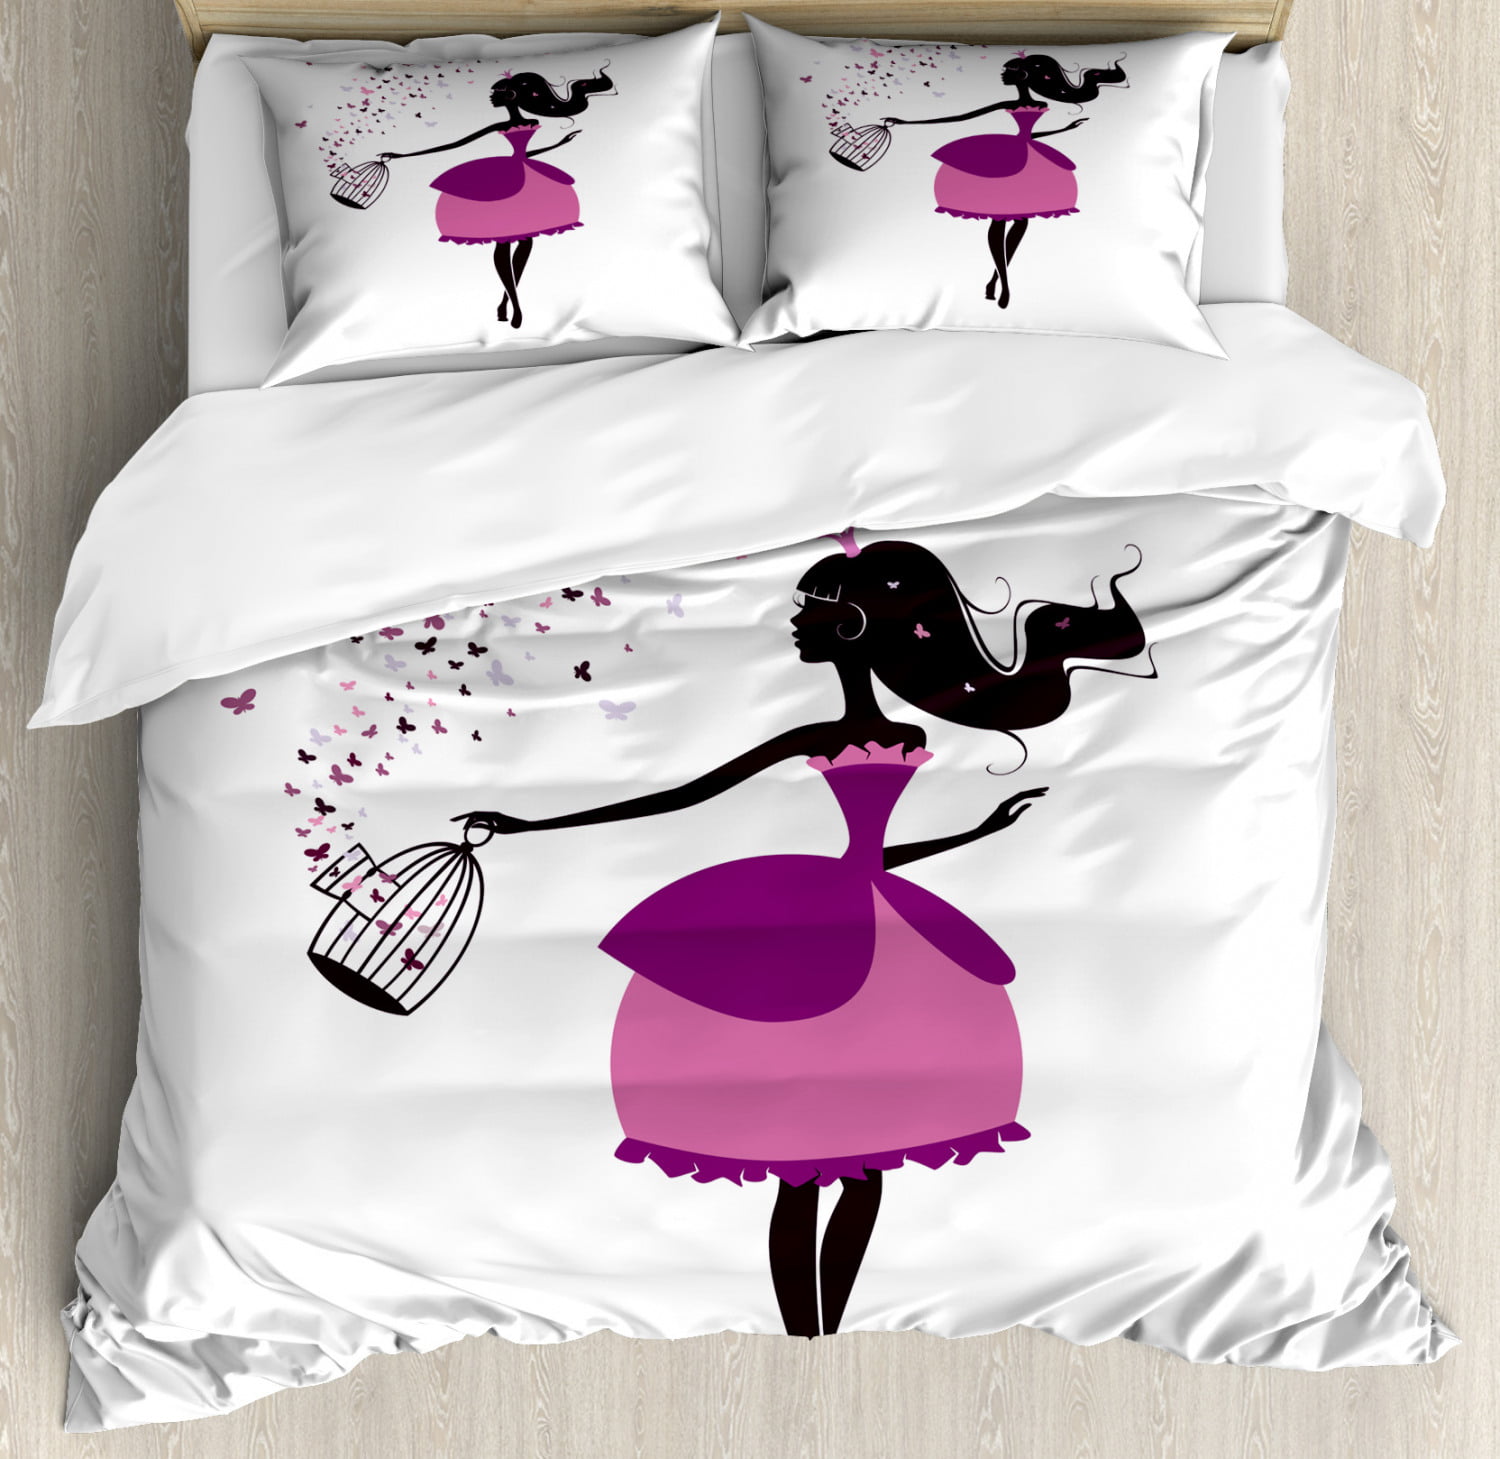 Princess Duvet Cover Set King Size Graphic Silhouette Of A